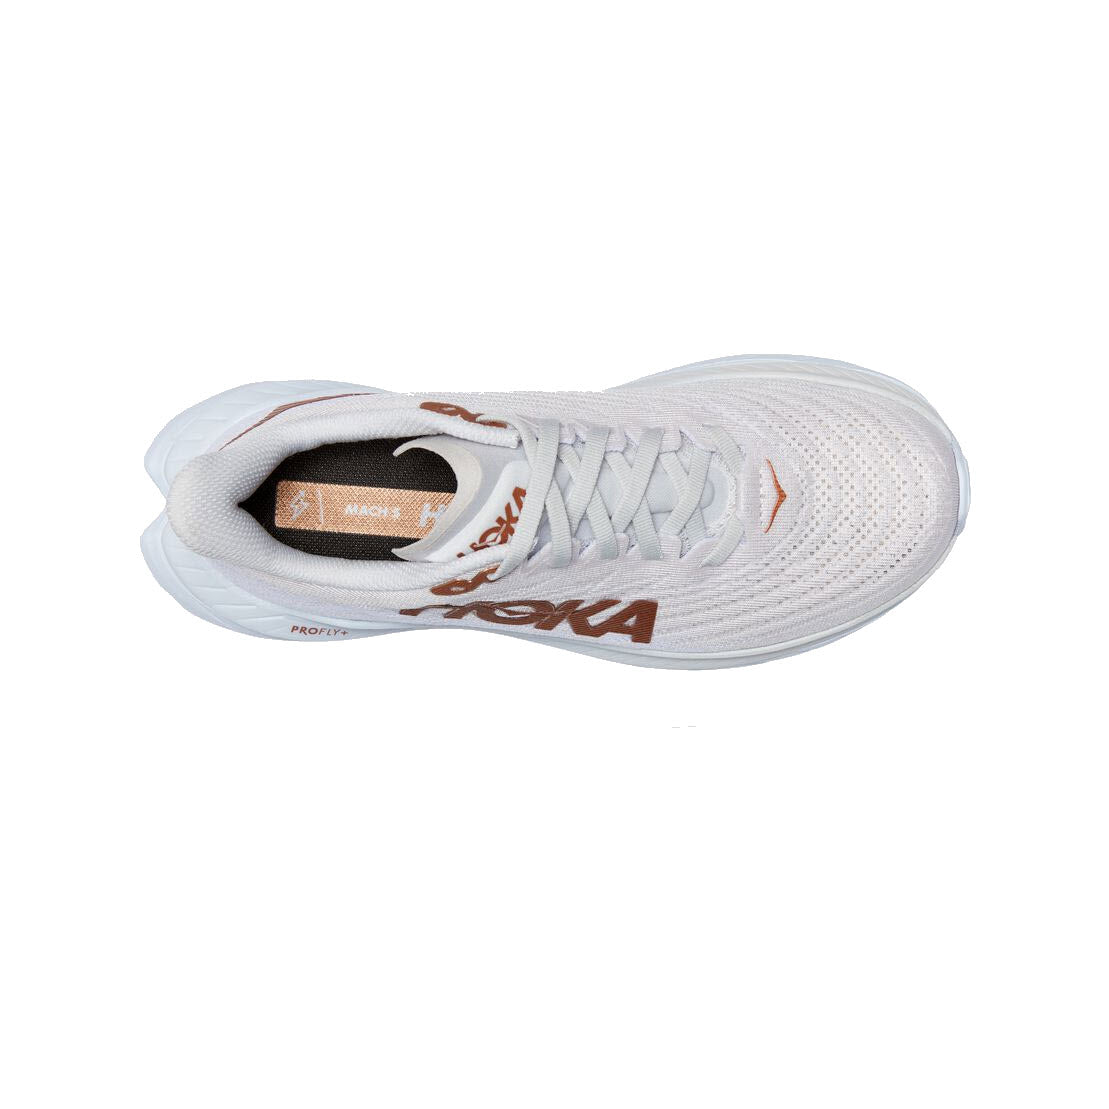 Top view of a single white HOKA ONE ONE Mach 5 running shoe with brown accents on a white background.